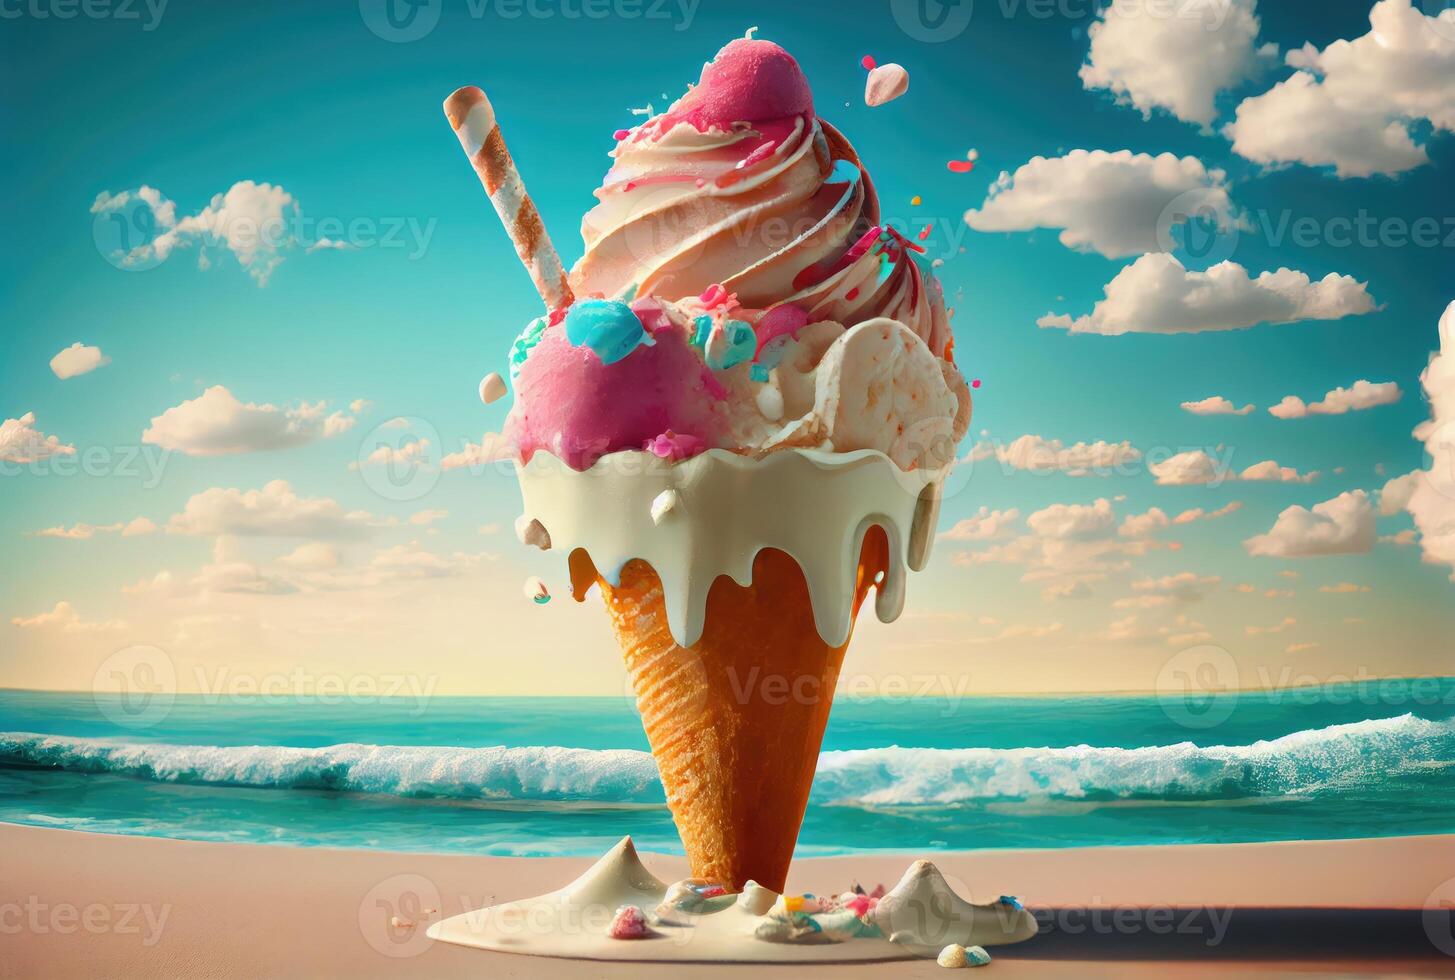 Ice cream cone with sweet toppings on beach sea and blue sky in summer background. Summer food and fun concept. Digital art illustration theme. photo